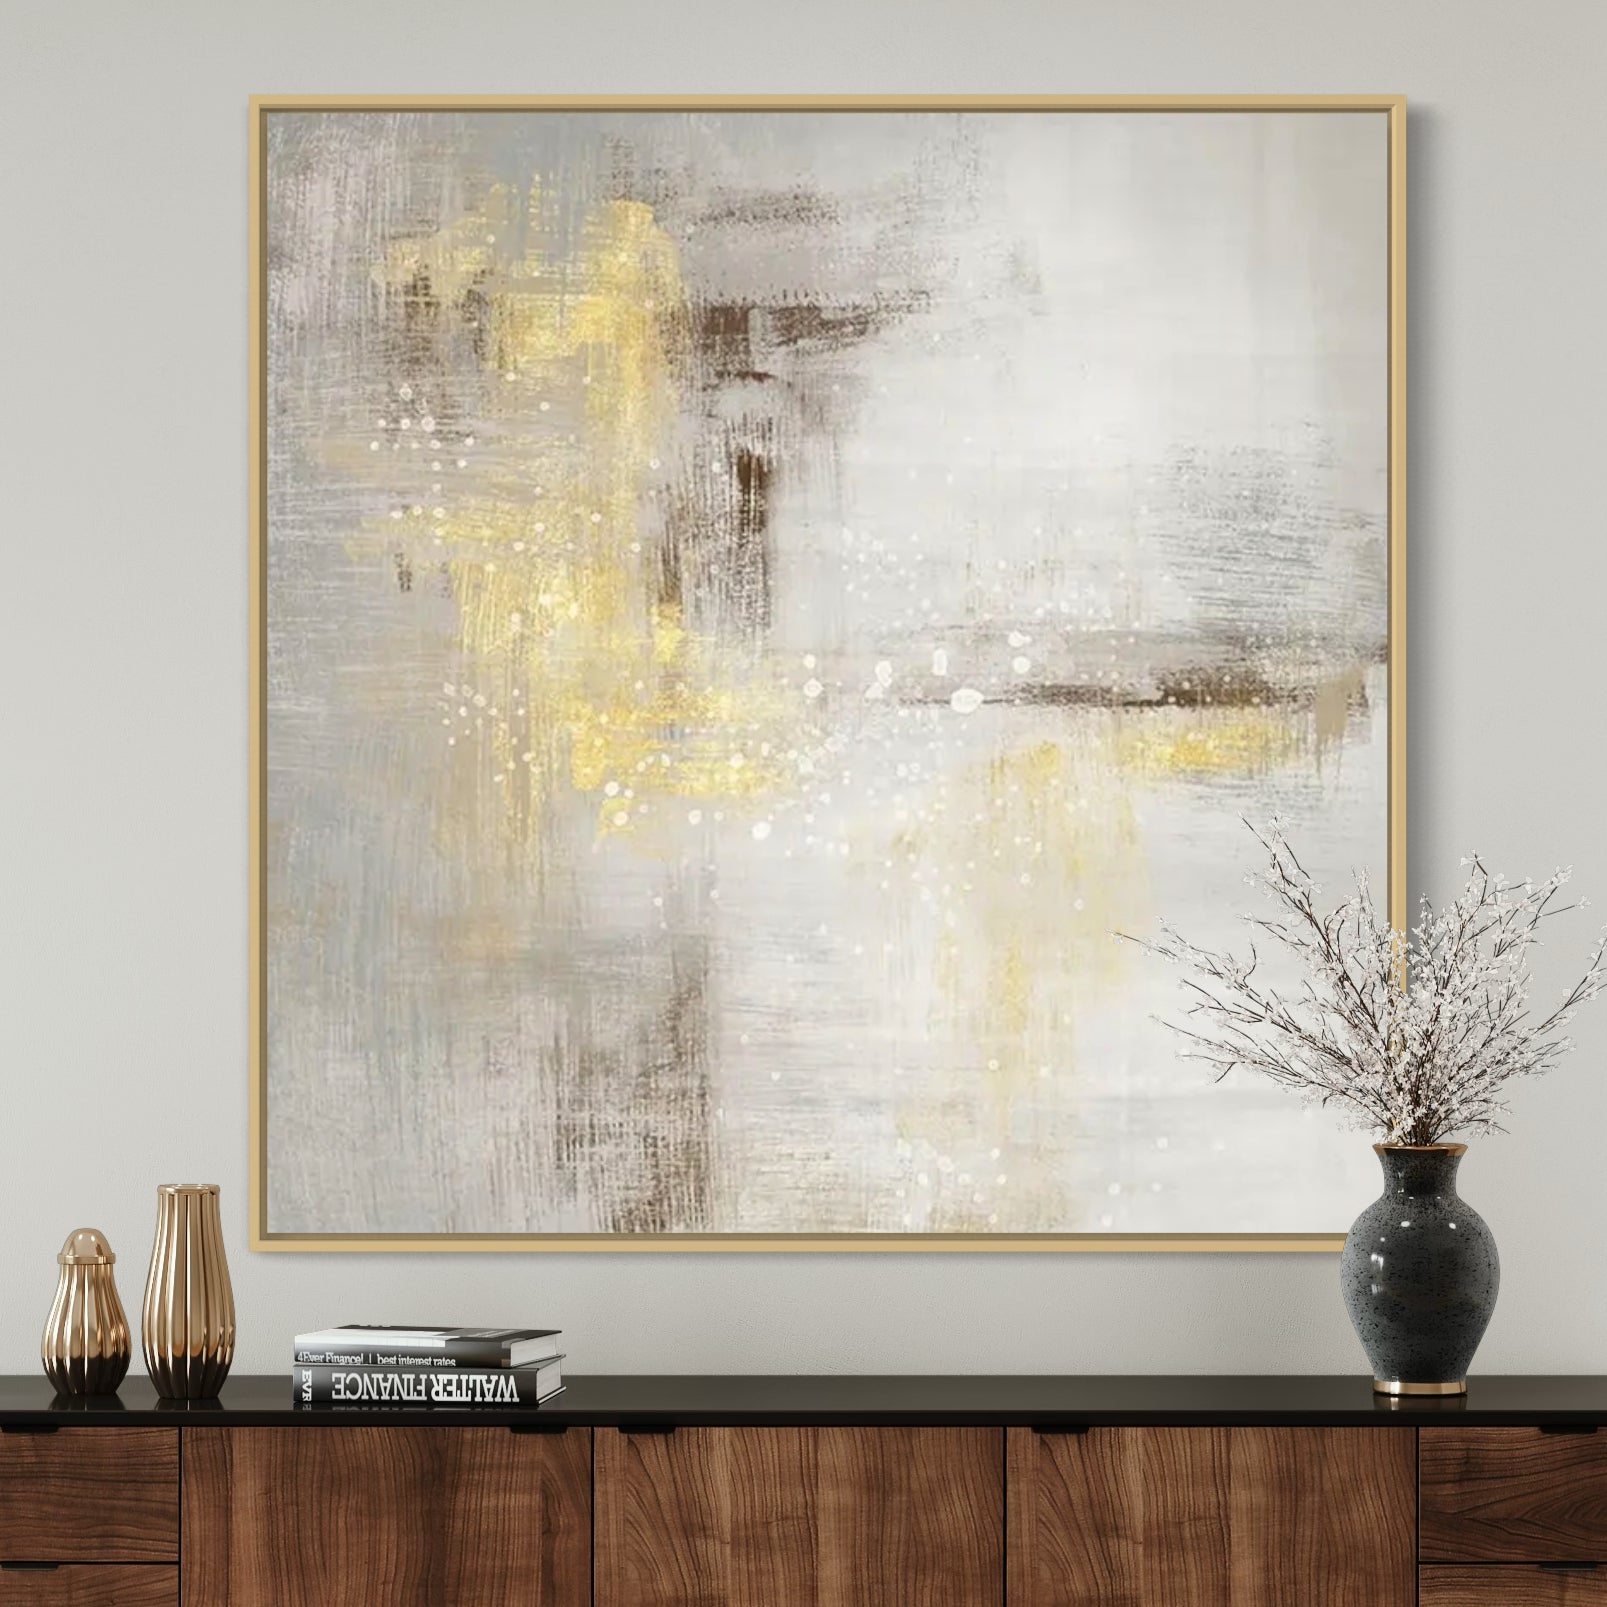 The World Of Light, Champagne / 120x120cm